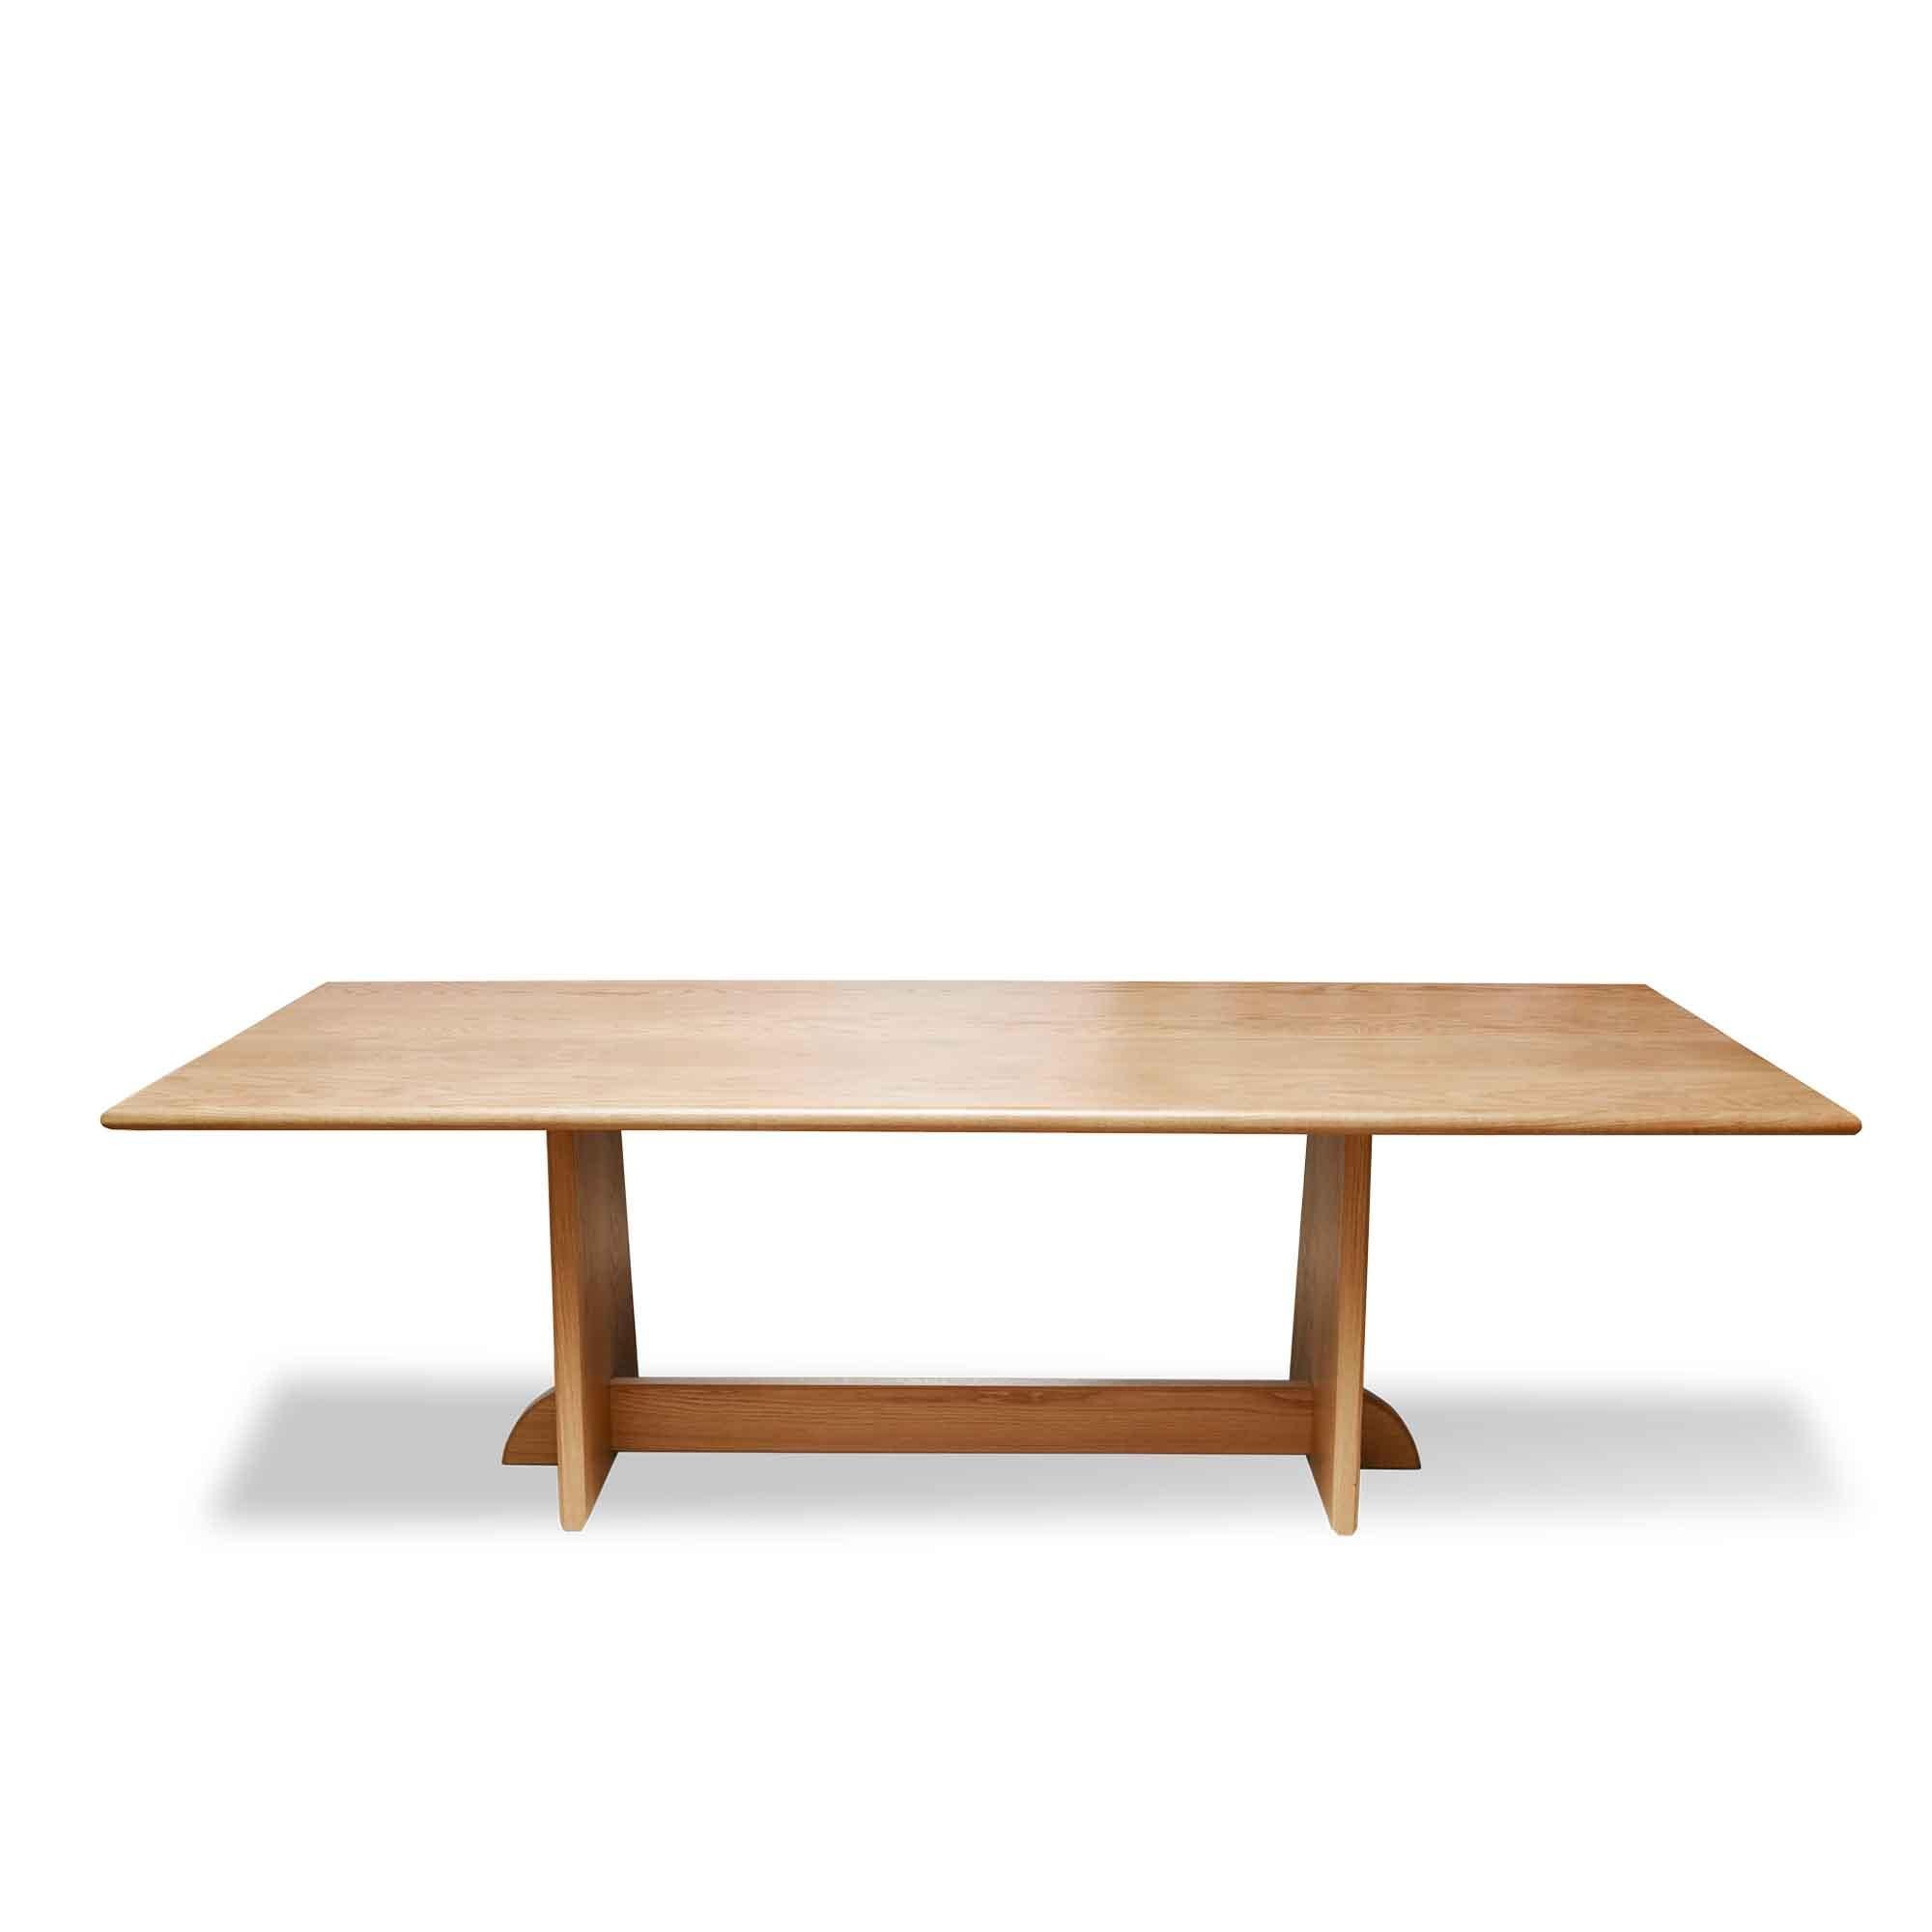 The Ojai dining table features a trestle base made of solid wood and the option of a stone or solid wood top. 

The Lawson-Fenning Collection is designed and handmade in Los Angeles, California. Reach out to discover what options are currently in